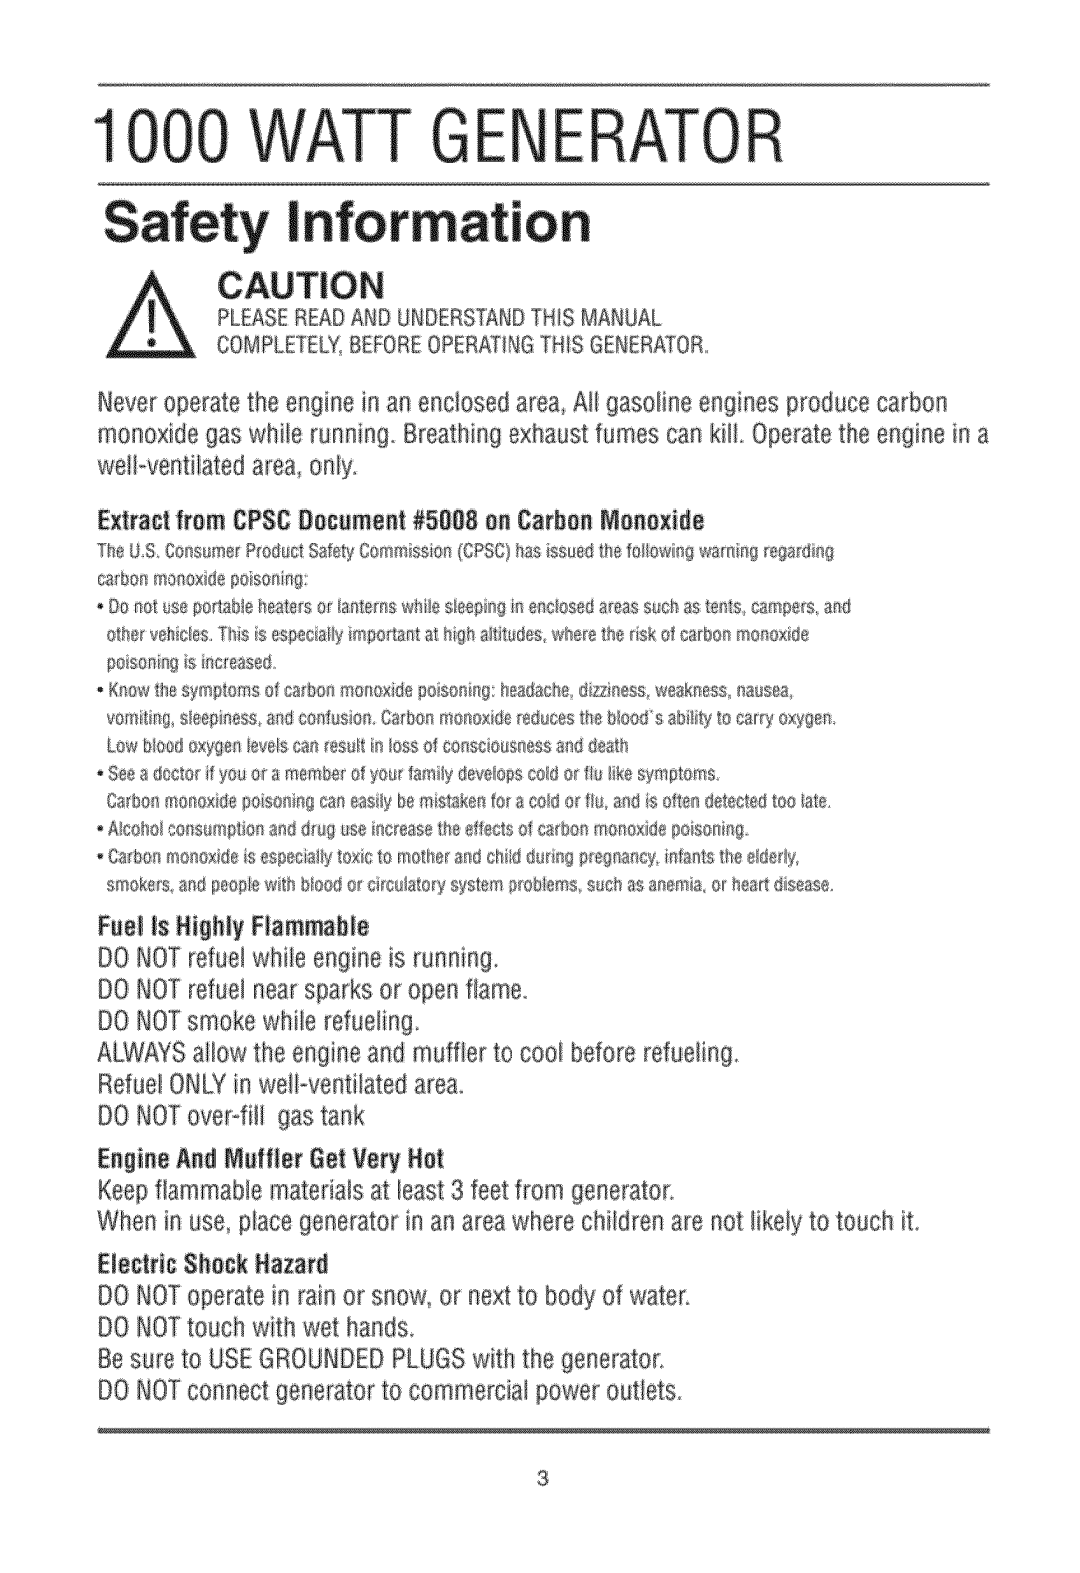 Sears APG3004A manual Safety information, G E R, cAUT|ON 